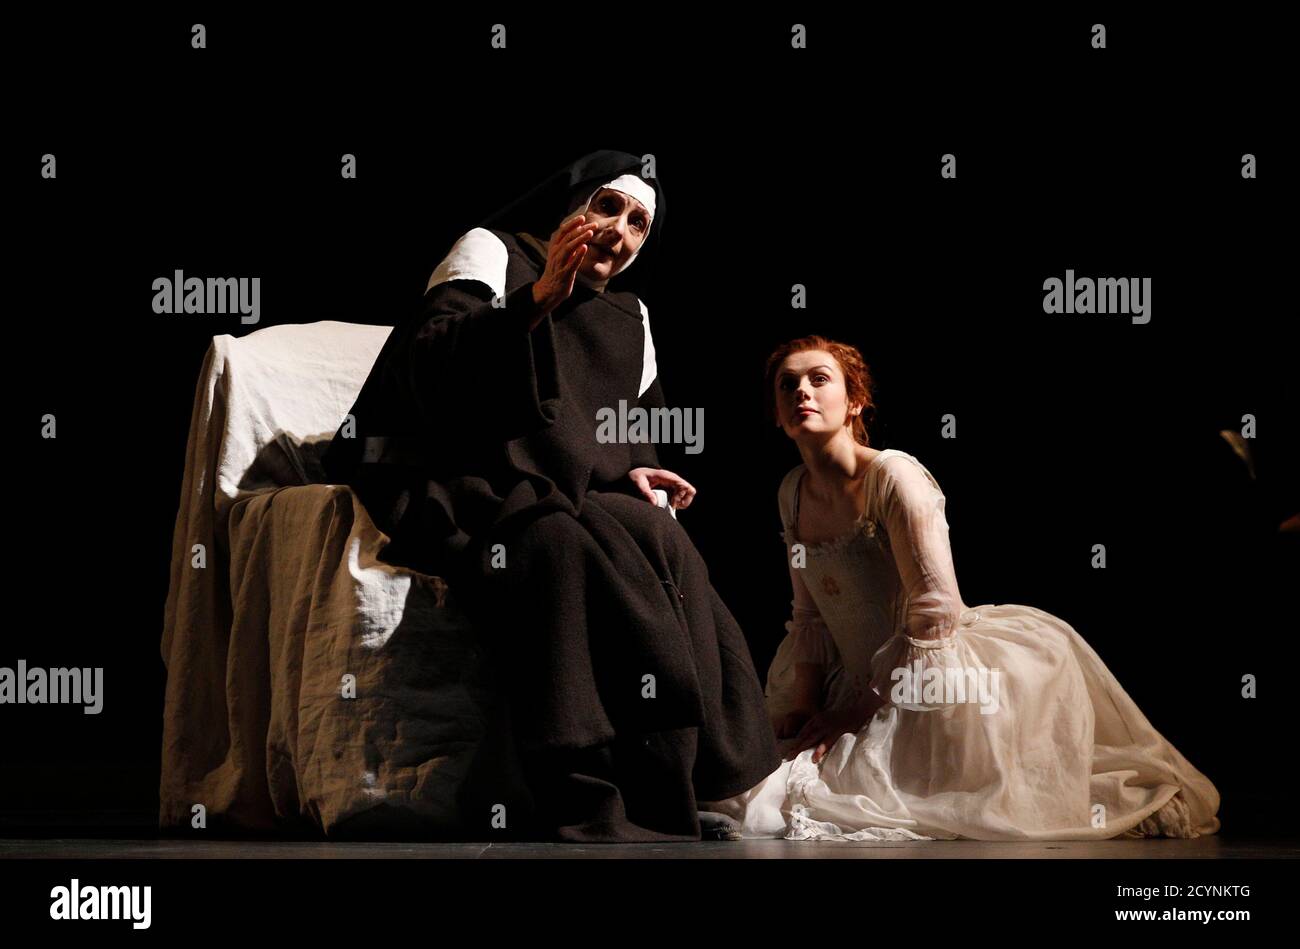 Singers Deborah Polaski (L) and Patricia Petibon perform on stage during a dress rehearsal of Francis Poulenc's opera "Dialogues des Carmelites" at Theater an der Wien in Vienna April 13, 2011. The opera is conducted by Bertrand de Billy and will premiere on April 16.   REUTERS/Herwig Prammer (AUSTRIA - Tags: ENTERTAINMENT SOCIETY) Foto Stock